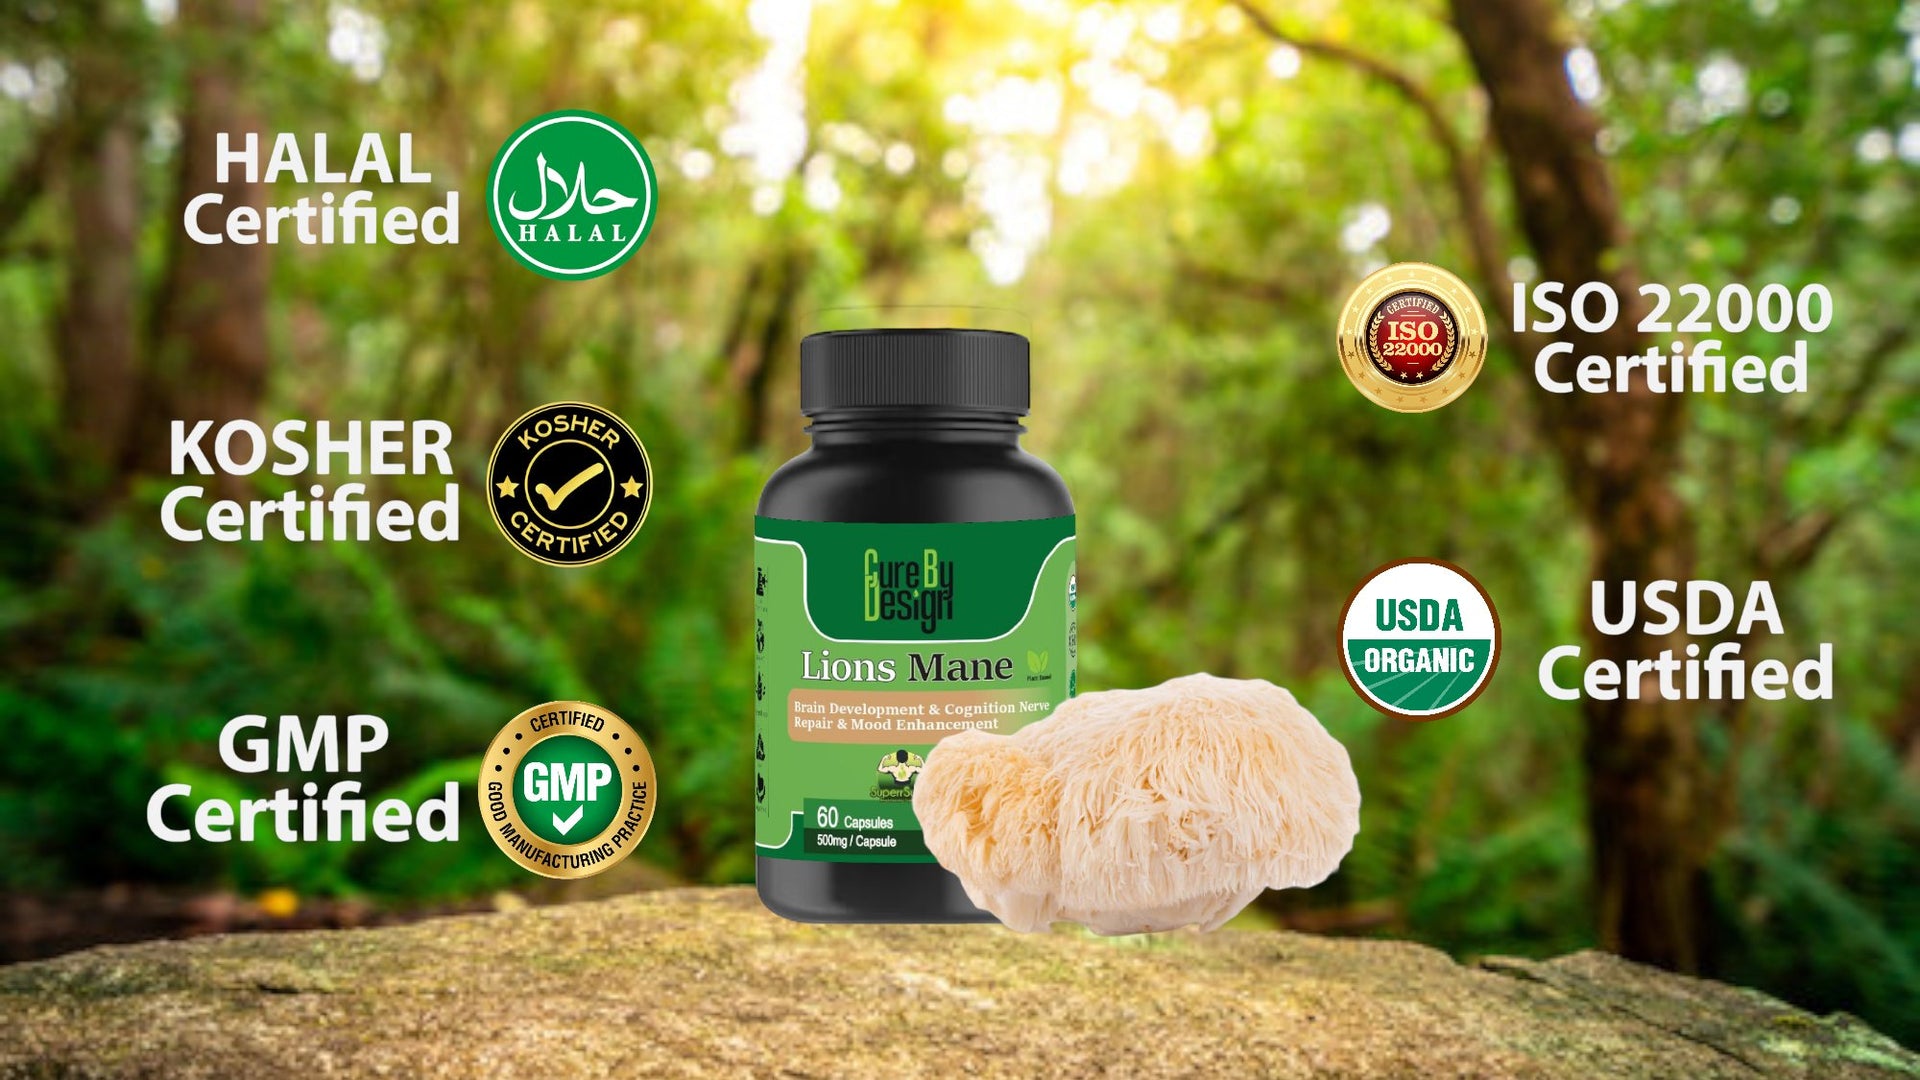 Cure By Design - Superrsupps Lions Mane Capsules - CBD Store India